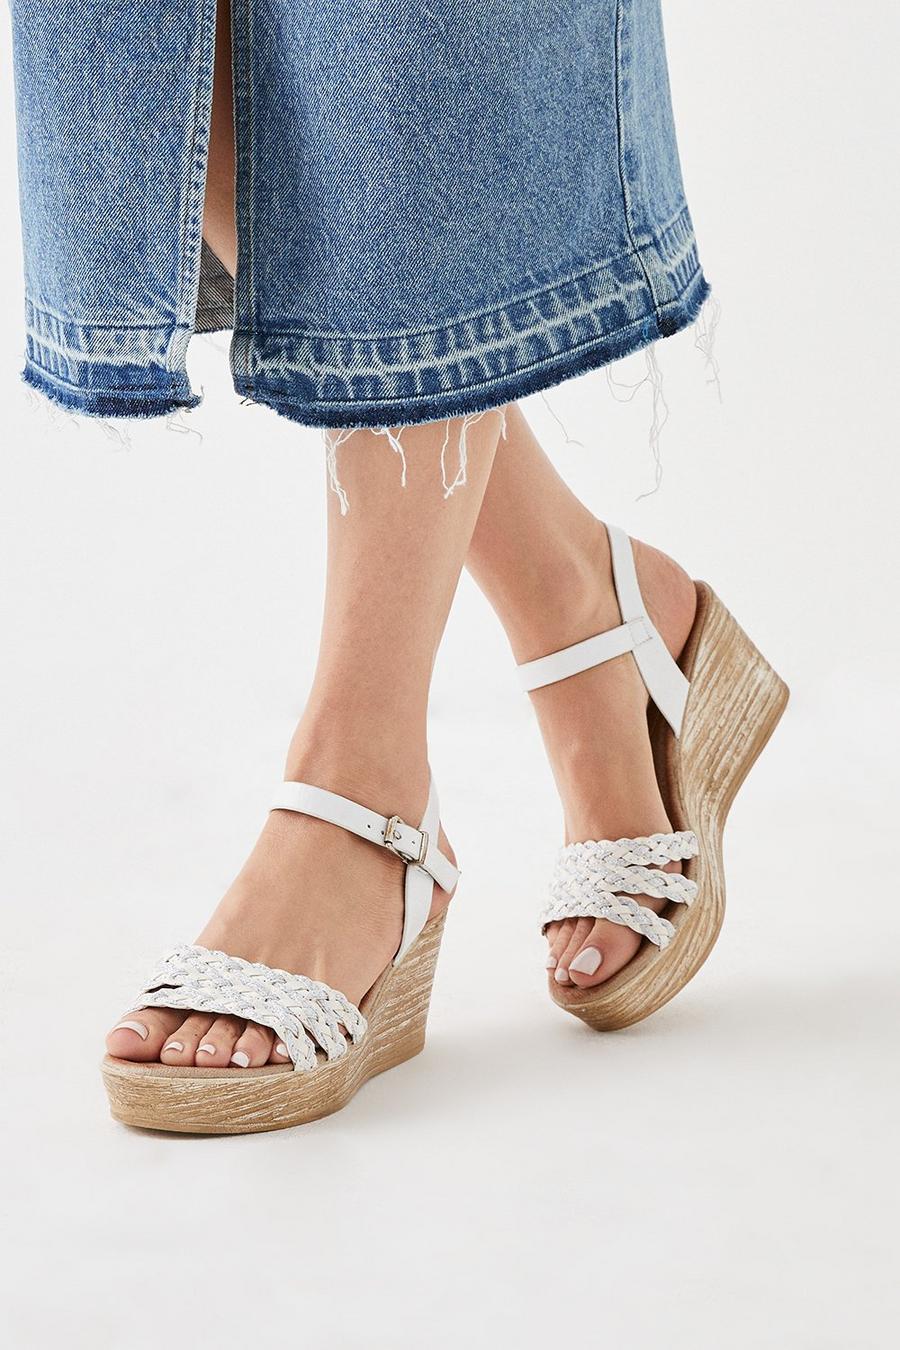 Good For The Sole: Harmony Comfort Wedges